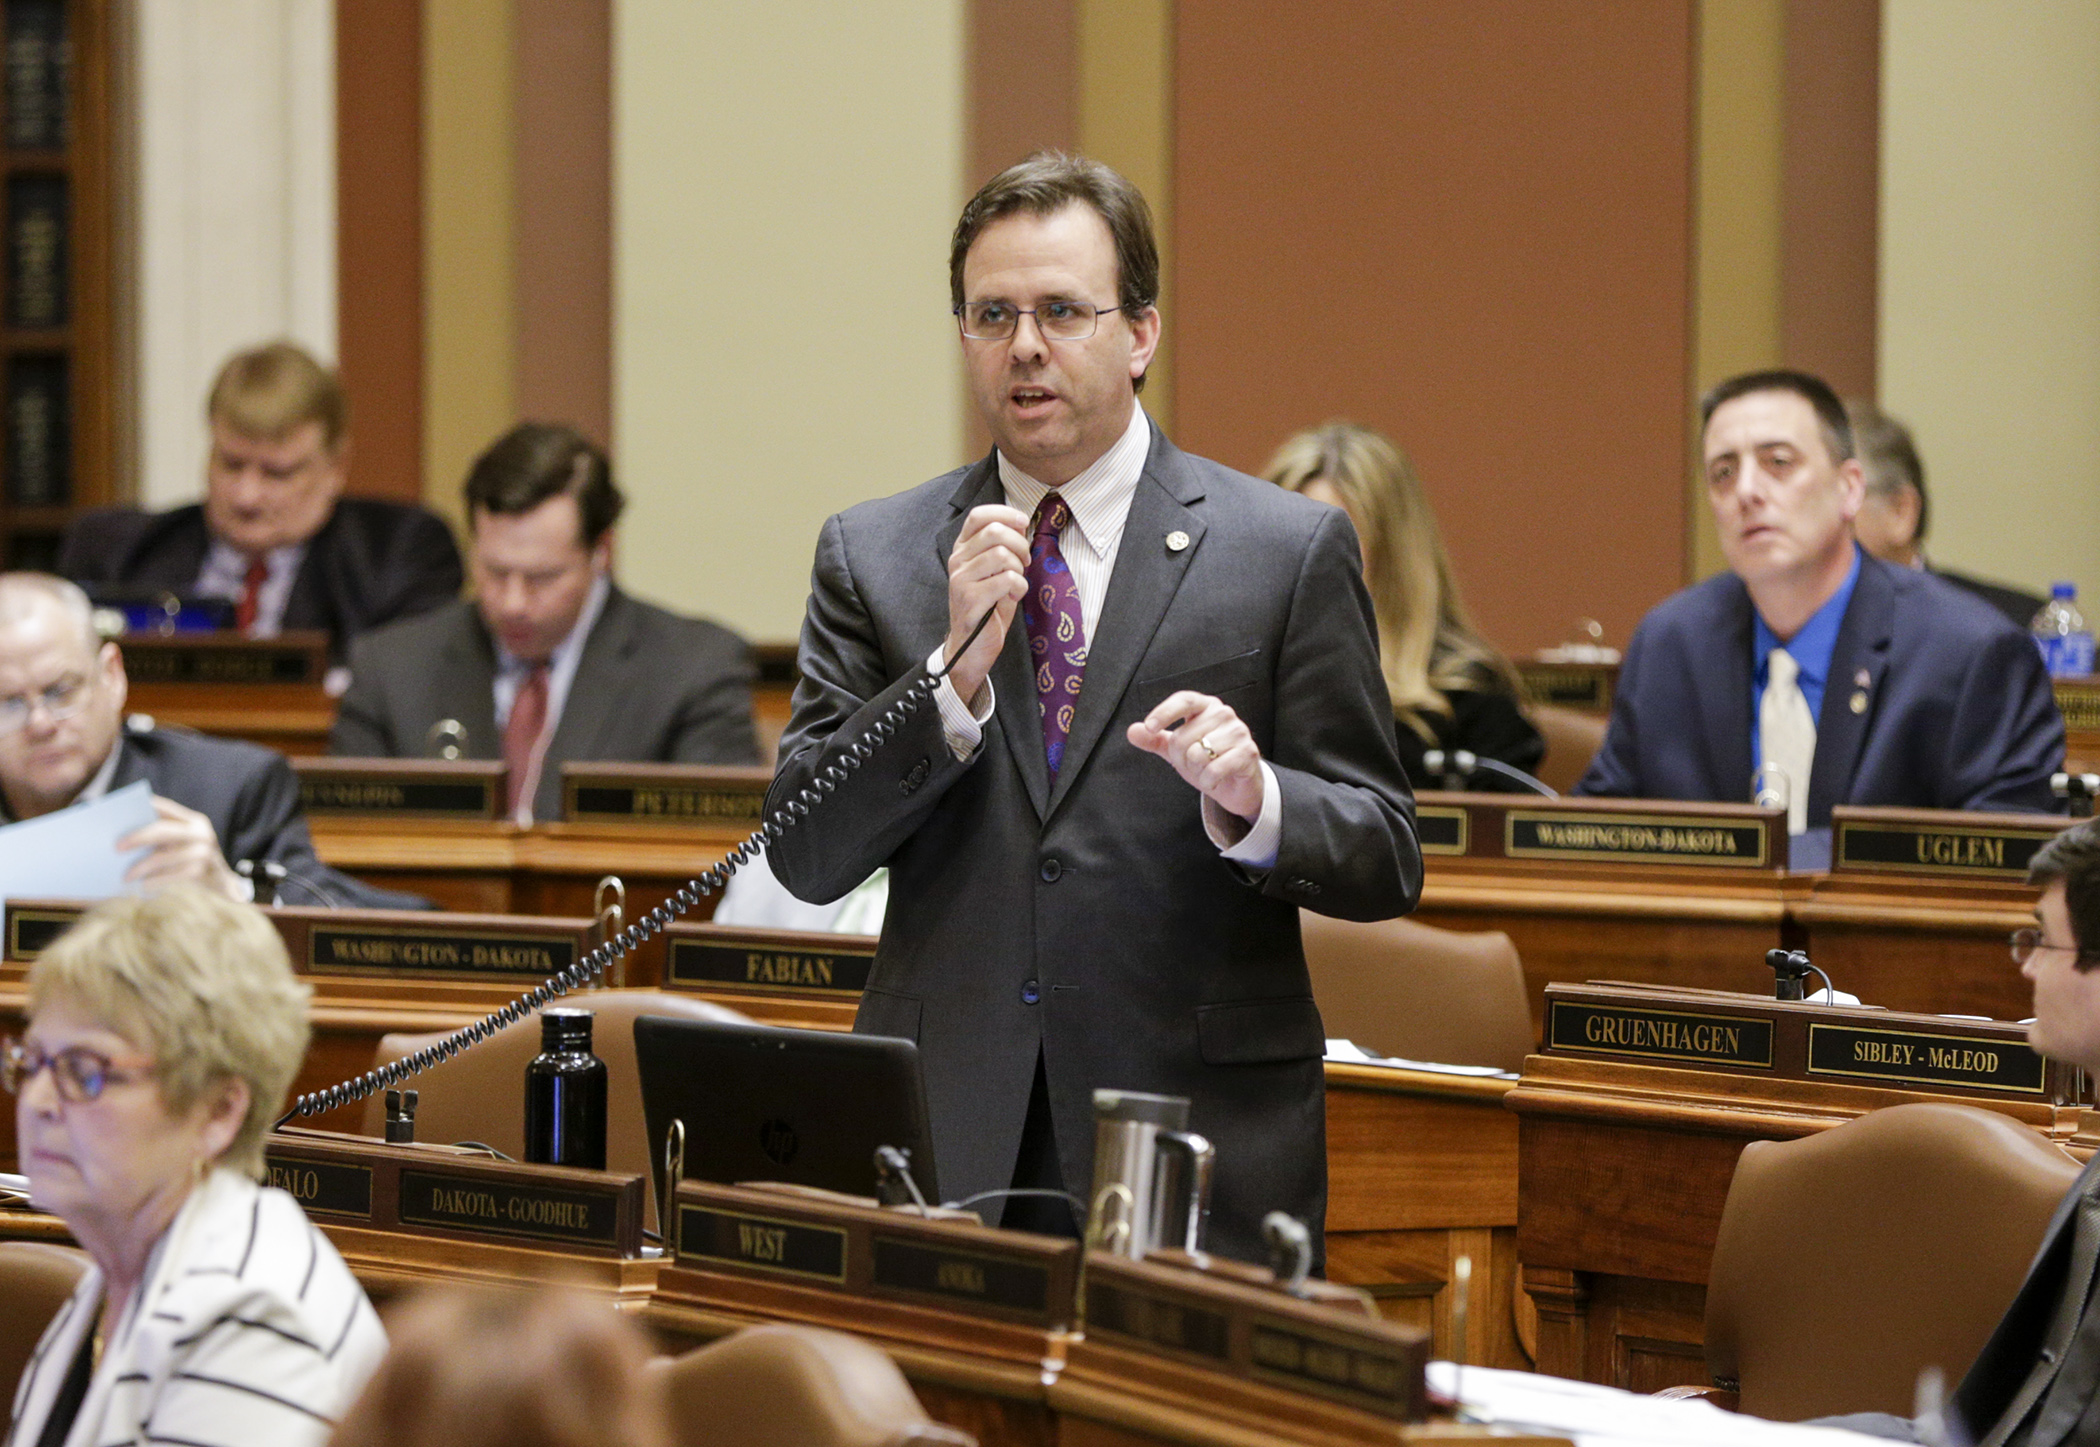 During a March 2 debate, Rep. Pat Garofalo speaks on his bill, HF600, which would prohibit local governments from adopting or enforcing certain employment regulations. Photo by Paul Battaglia